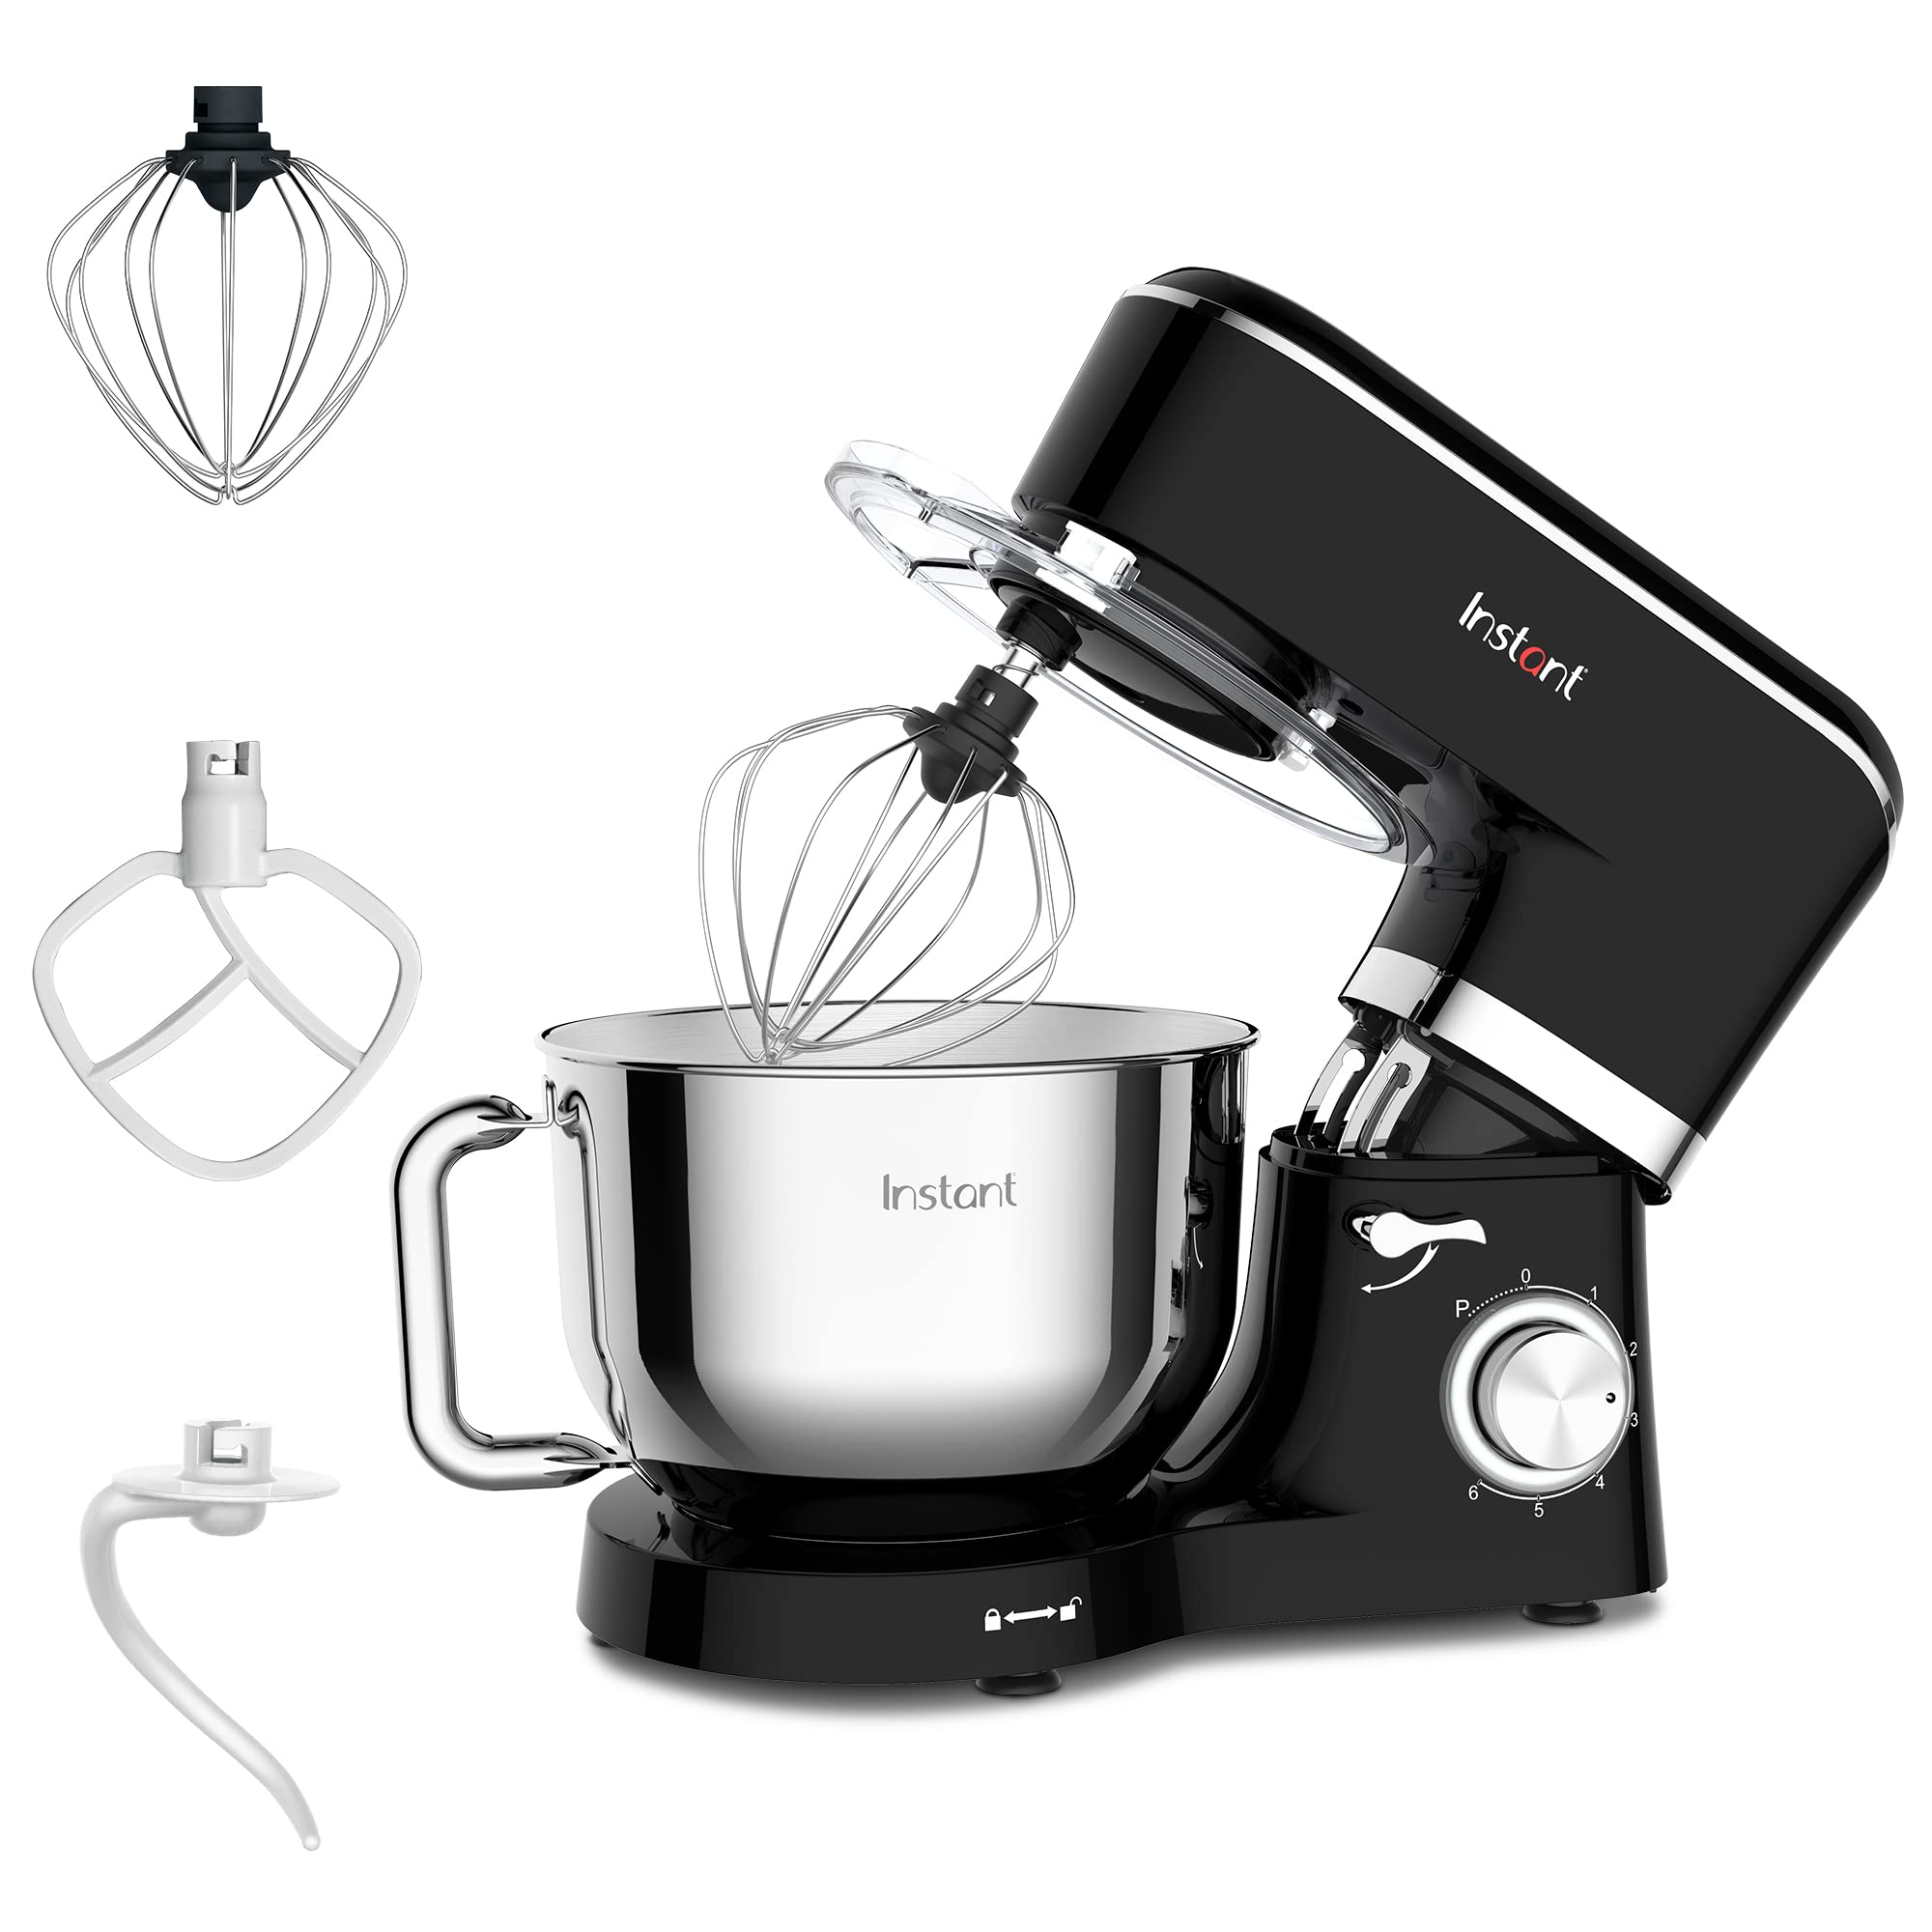 Instant Pot 6-Speed 6.3-Qt Stand Mixer with Stainless Steel Bowl $99.95